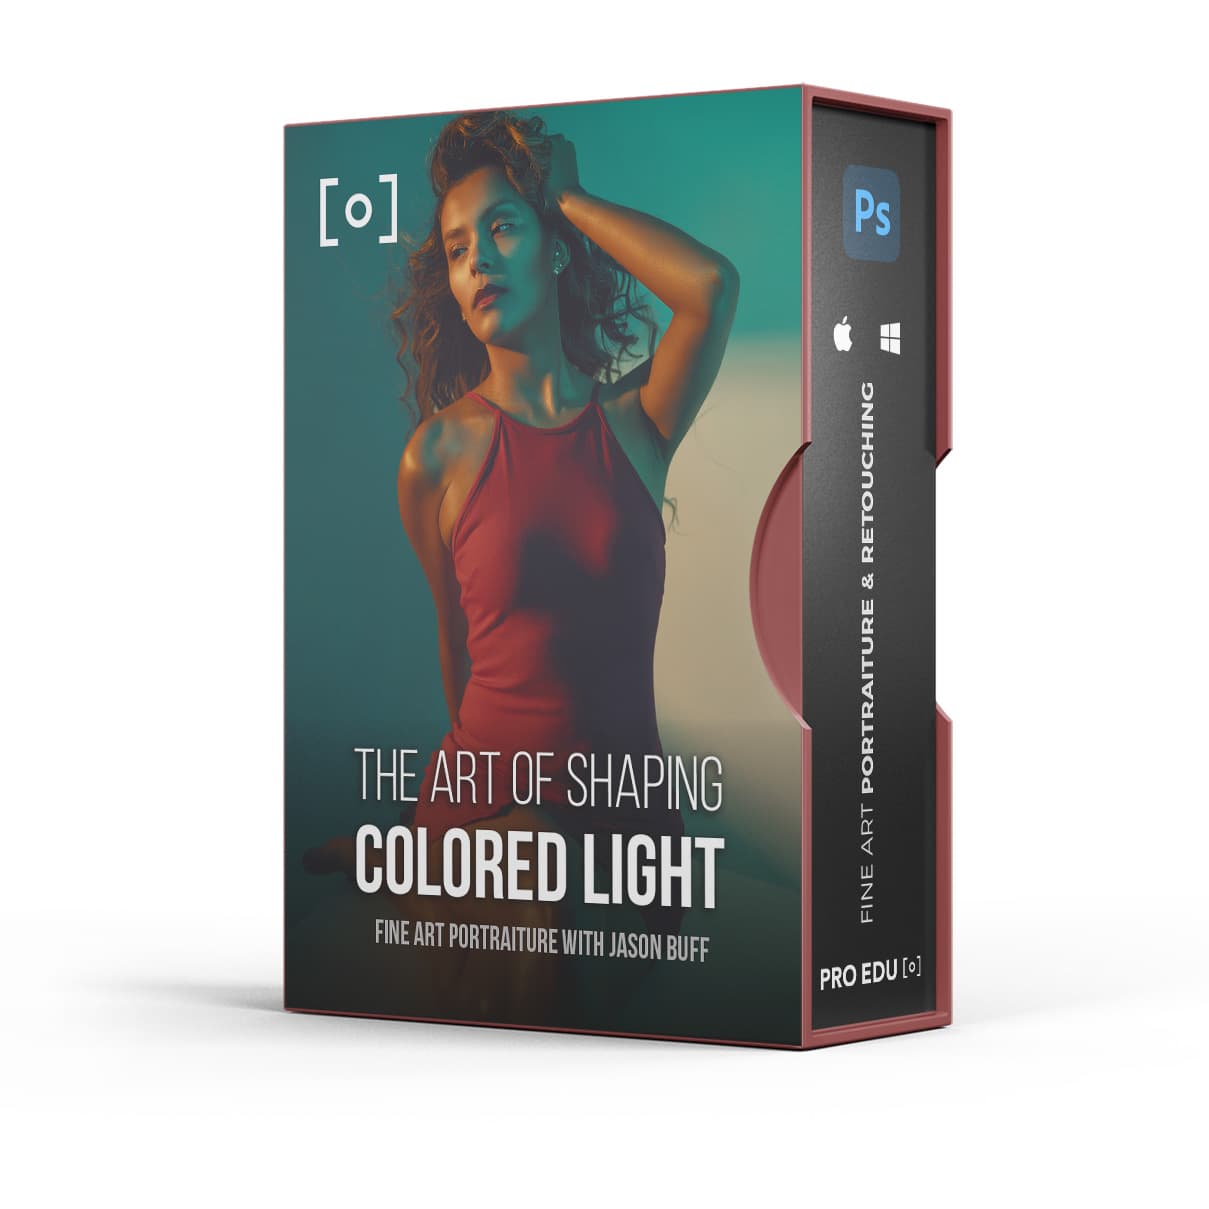 The Art Of Shaping Colored Light